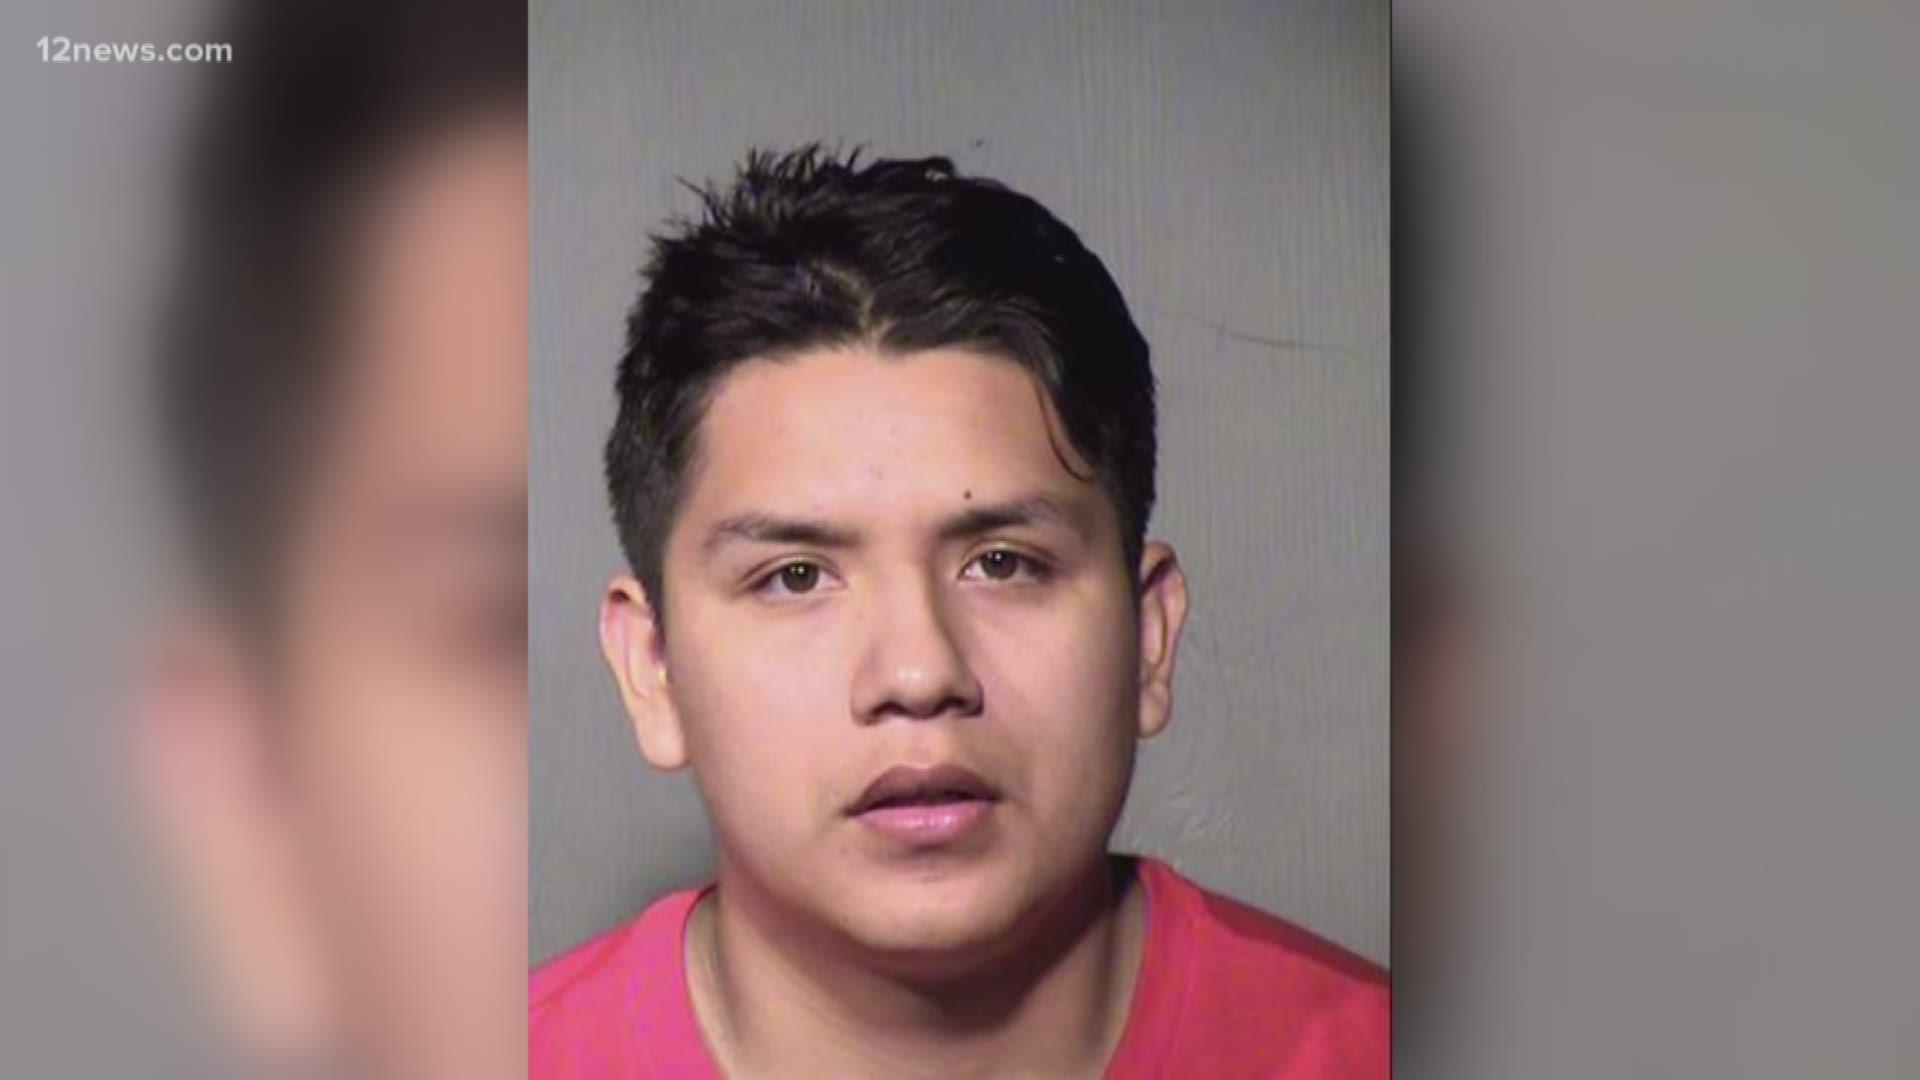 14 Aeyr Garls And Boy Xxx - Man accused of sexual conduct with 14-year-old girl in church chapel |  12news.com